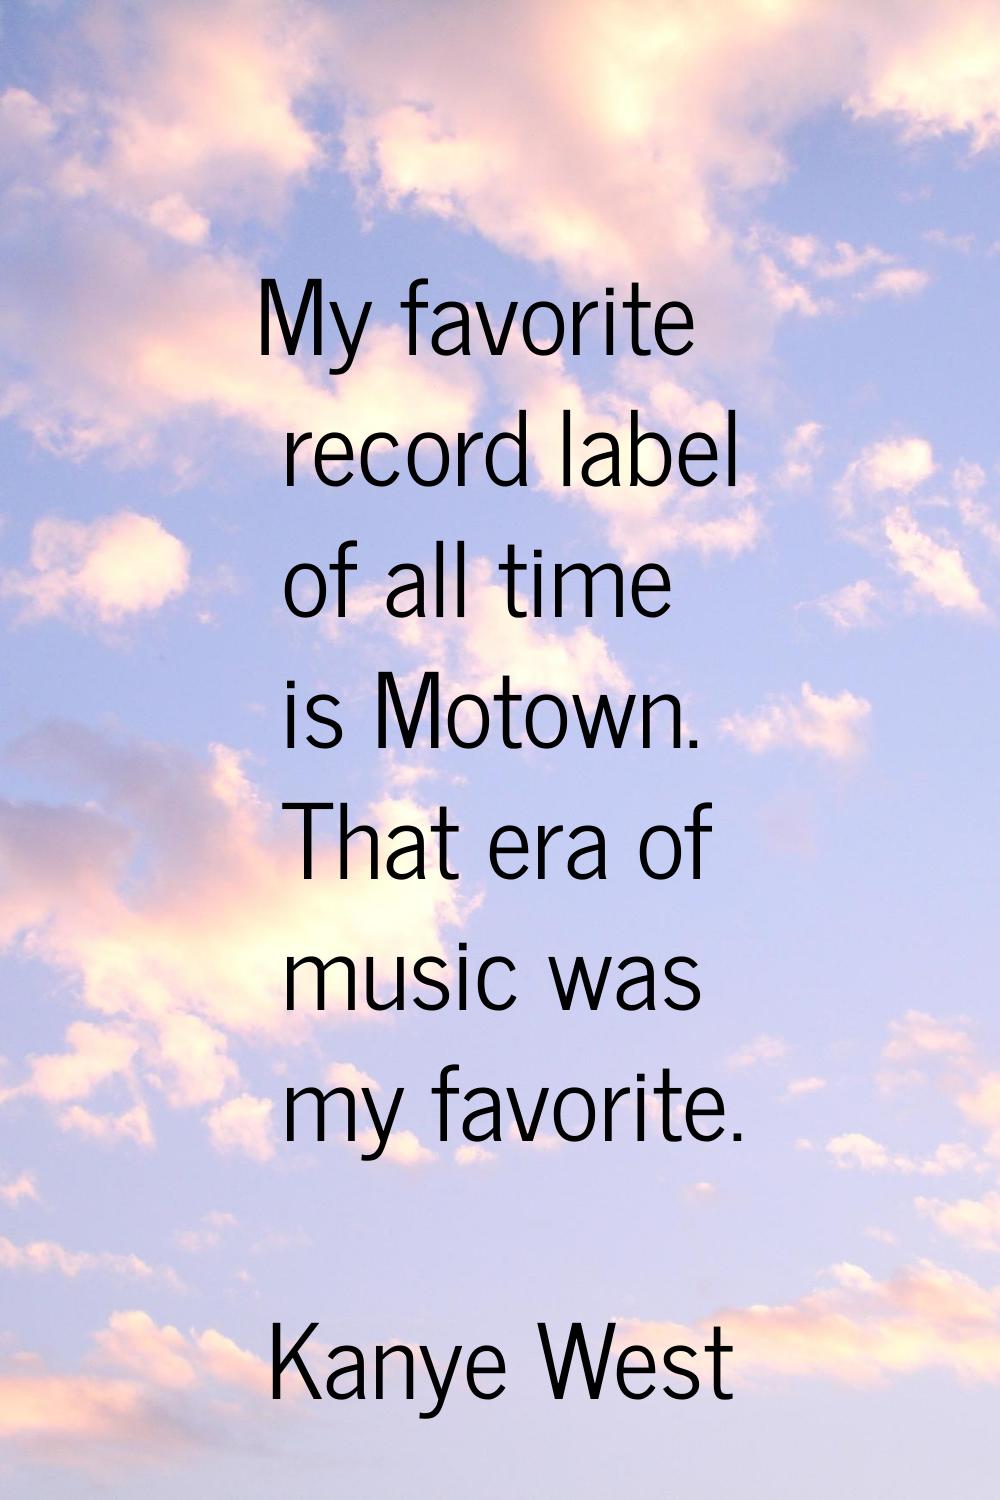 My favorite record label of all time is Motown. That era of music was my favorite.